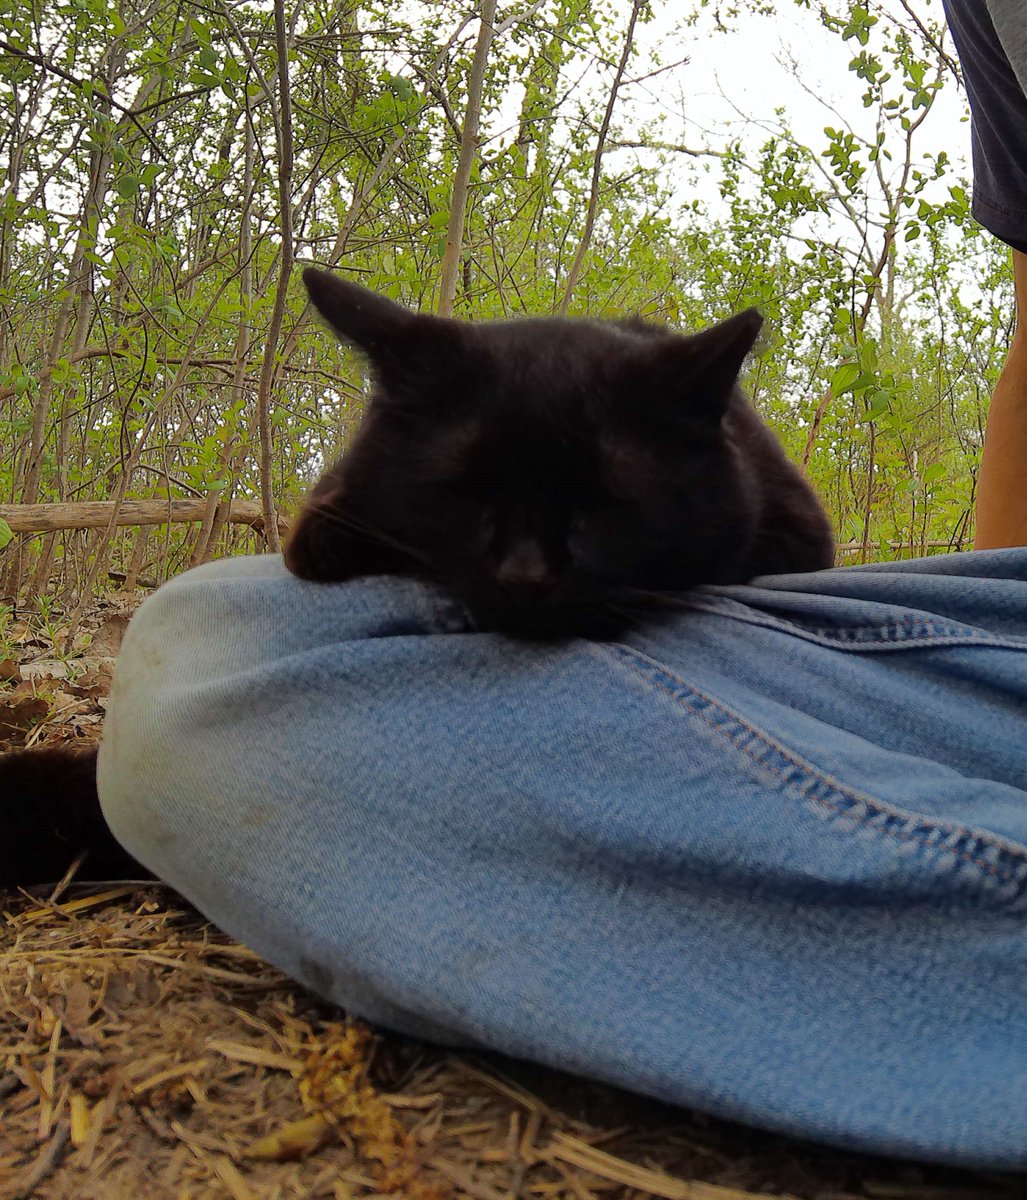 Blackie needed a nap after dinner. I guess I live here now. Please forward my mail. #CommunityCats #StrayCats #TNR